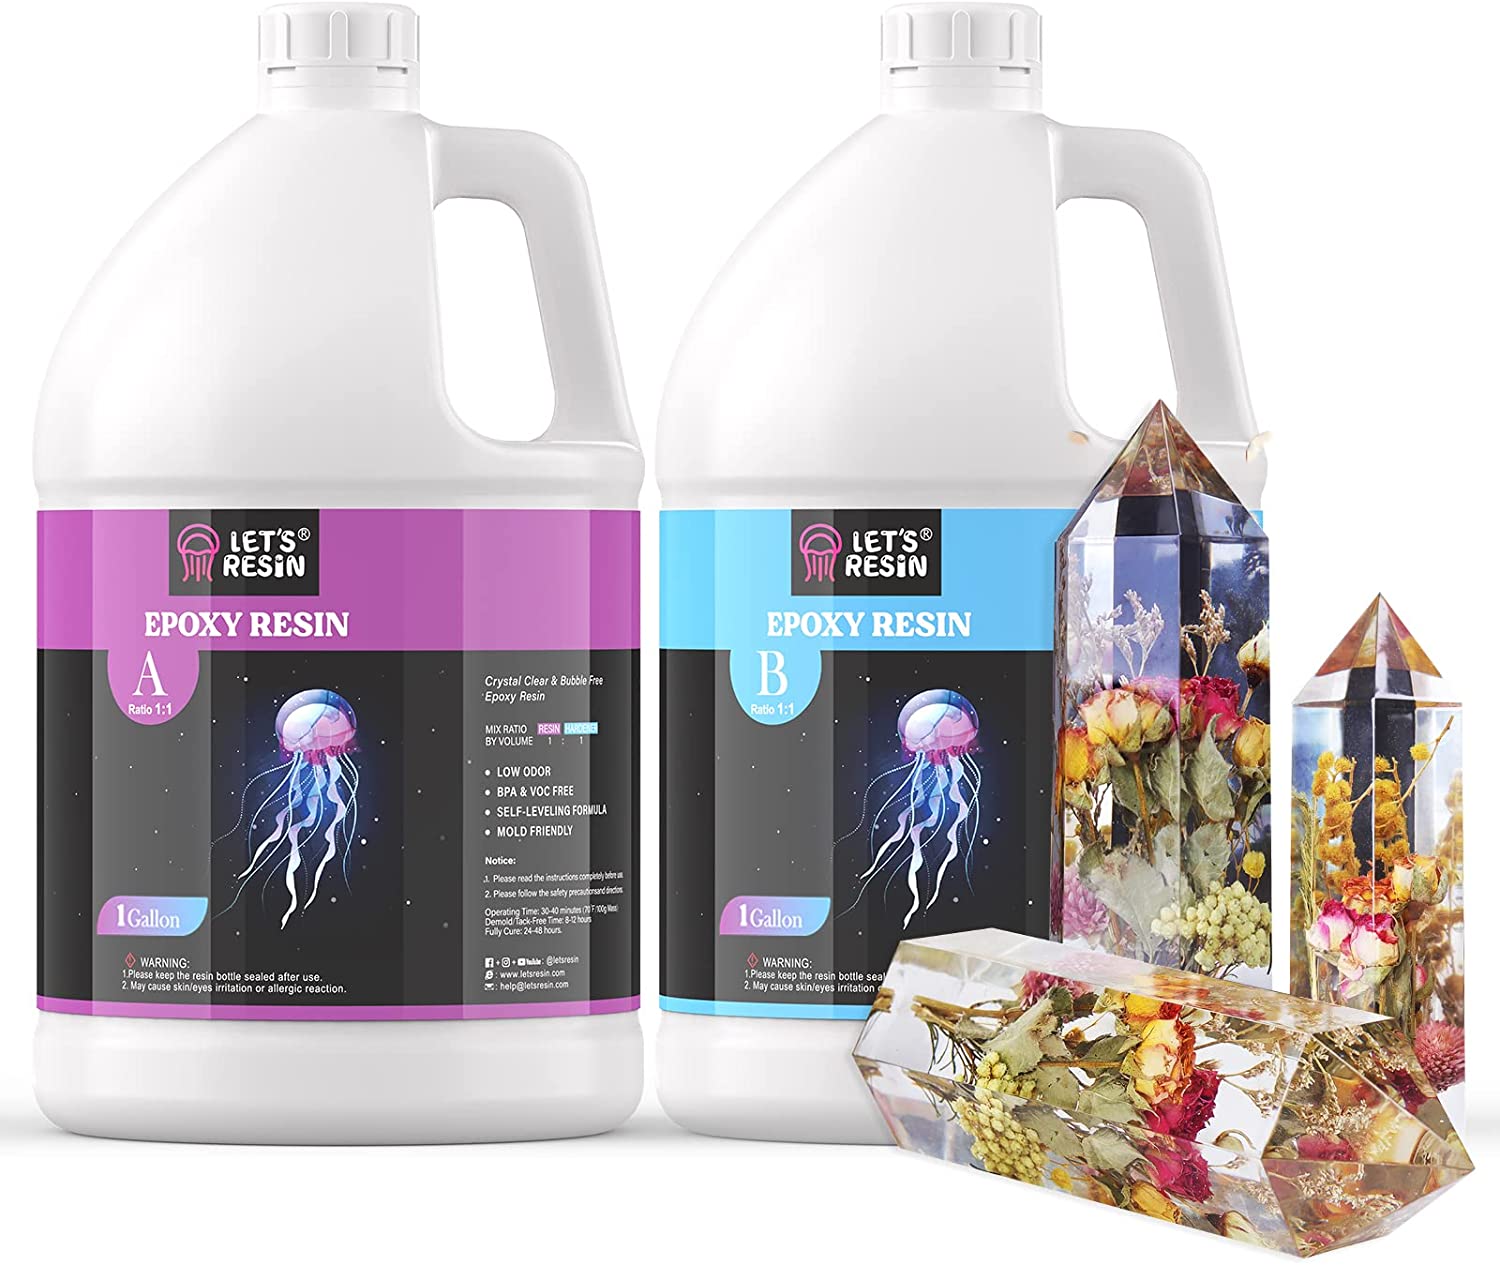 Primo Resin | 2 Gallons Premium Art Resin Kit | Best for Arts, Crafts, Jewelry, Tumblers | Non-Yellowing Crystal Clear | Non-Toxic, FDA & Low Odor